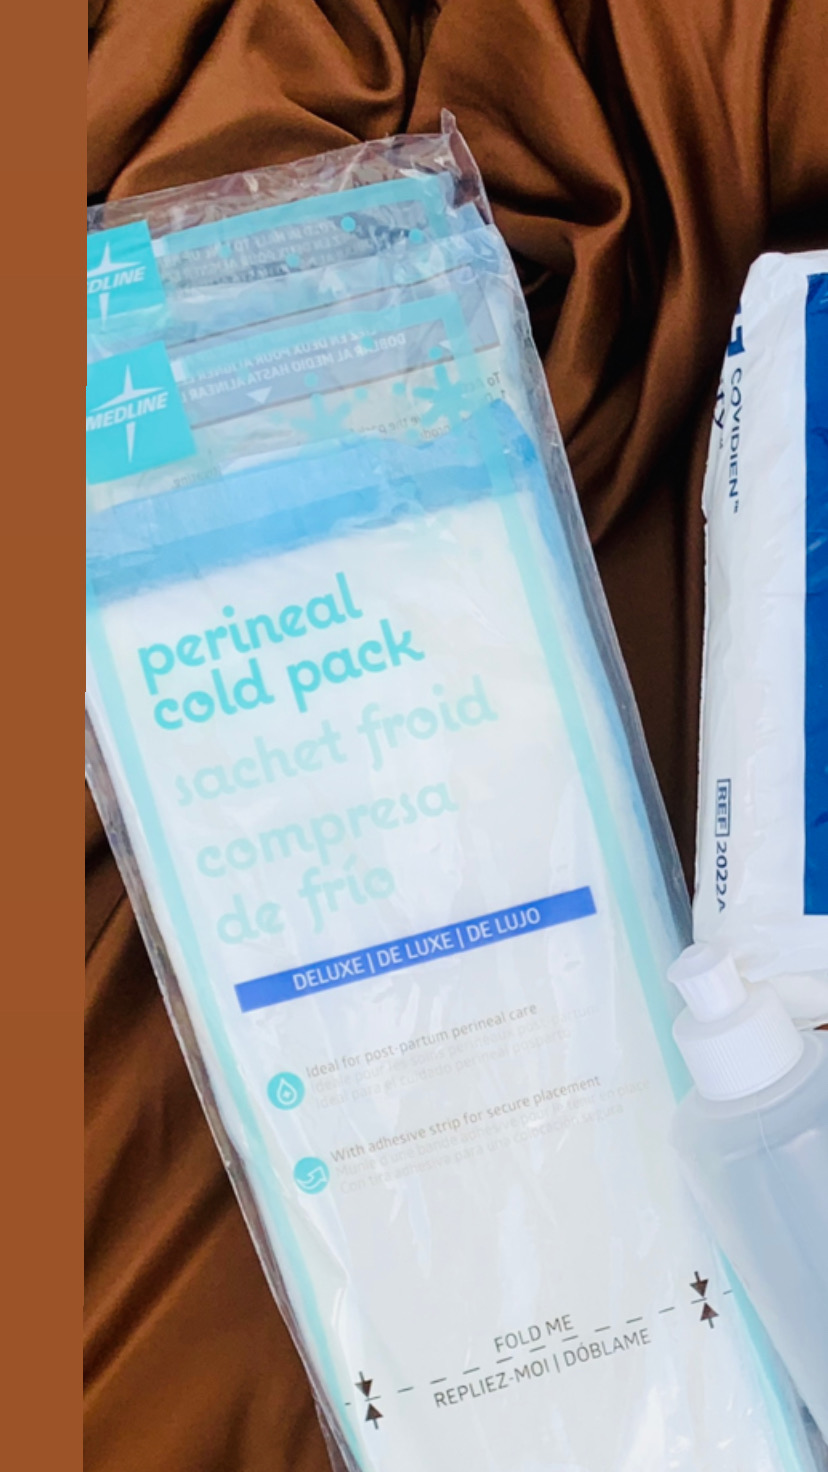 Medline Premium Perineal Cold Packs for Postpartum Care with